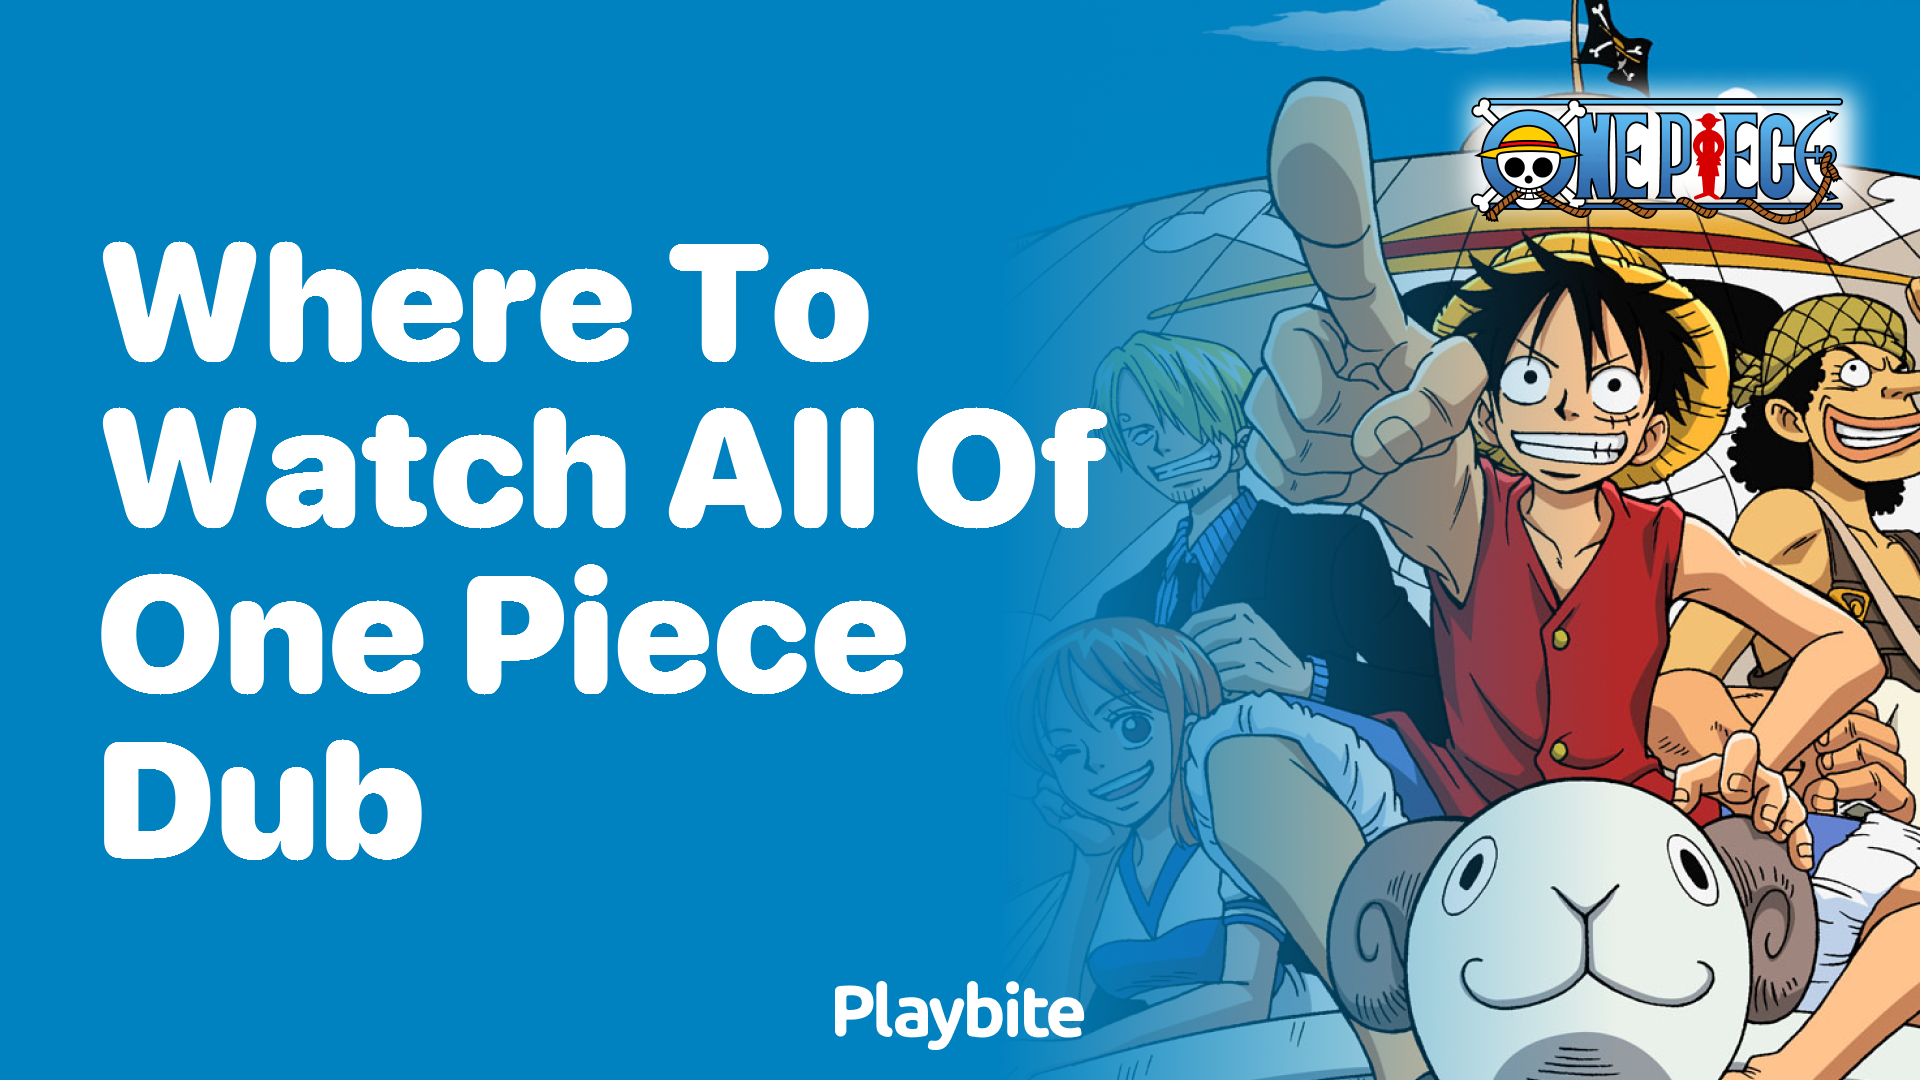 Where to Watch All of One Piece Dubbed